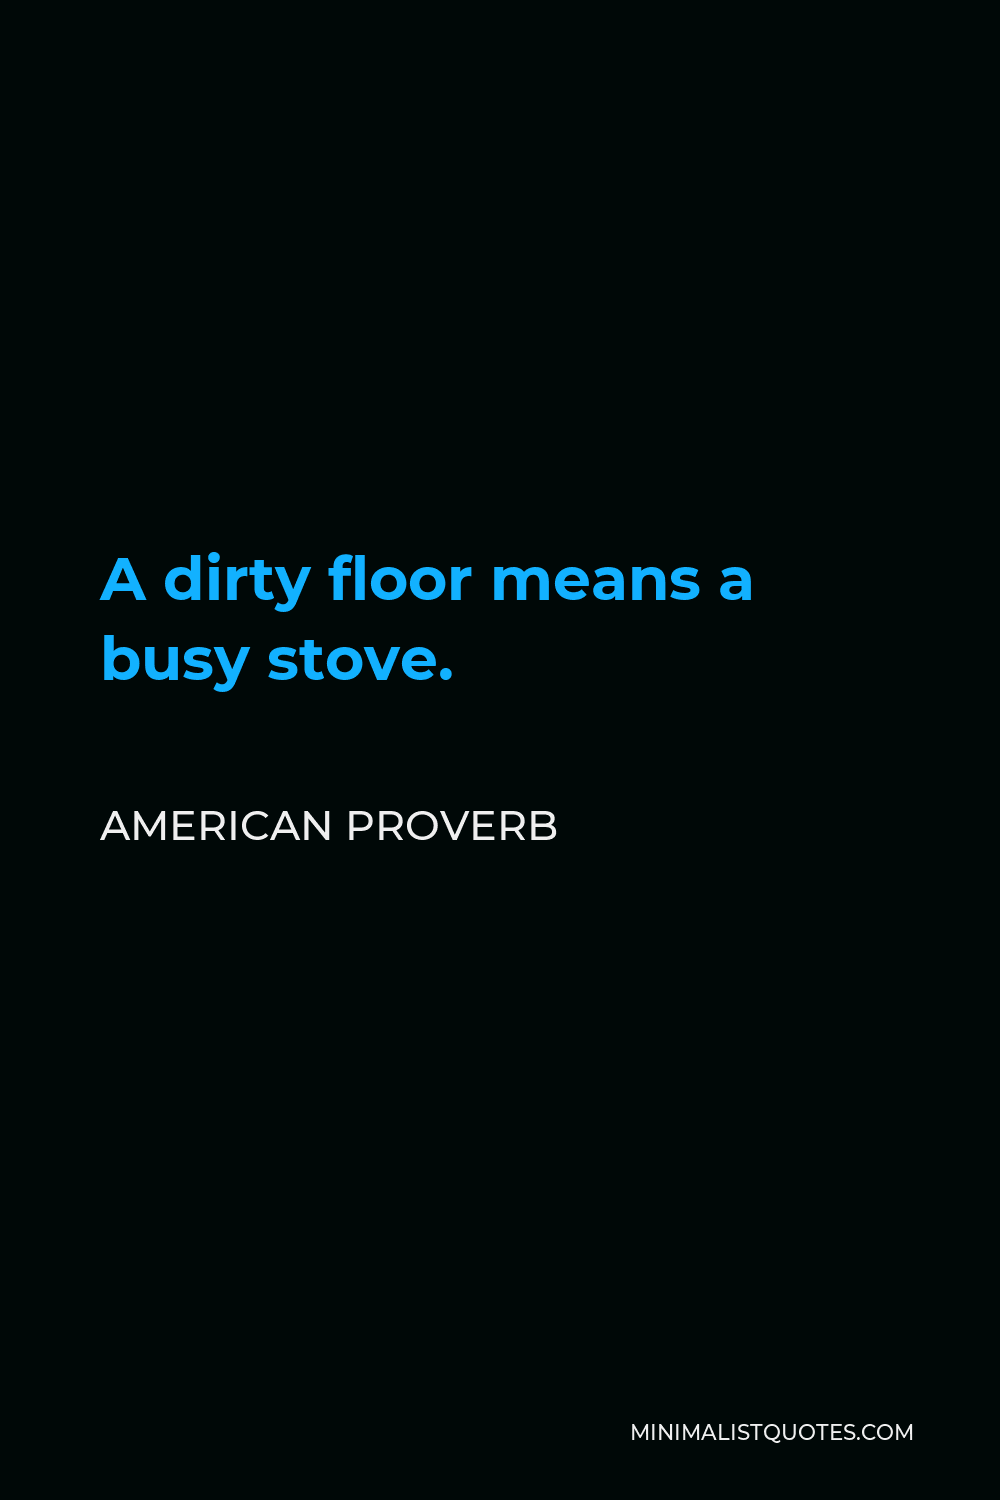 American Proverb Quote - A dirty floor means a busy stove.